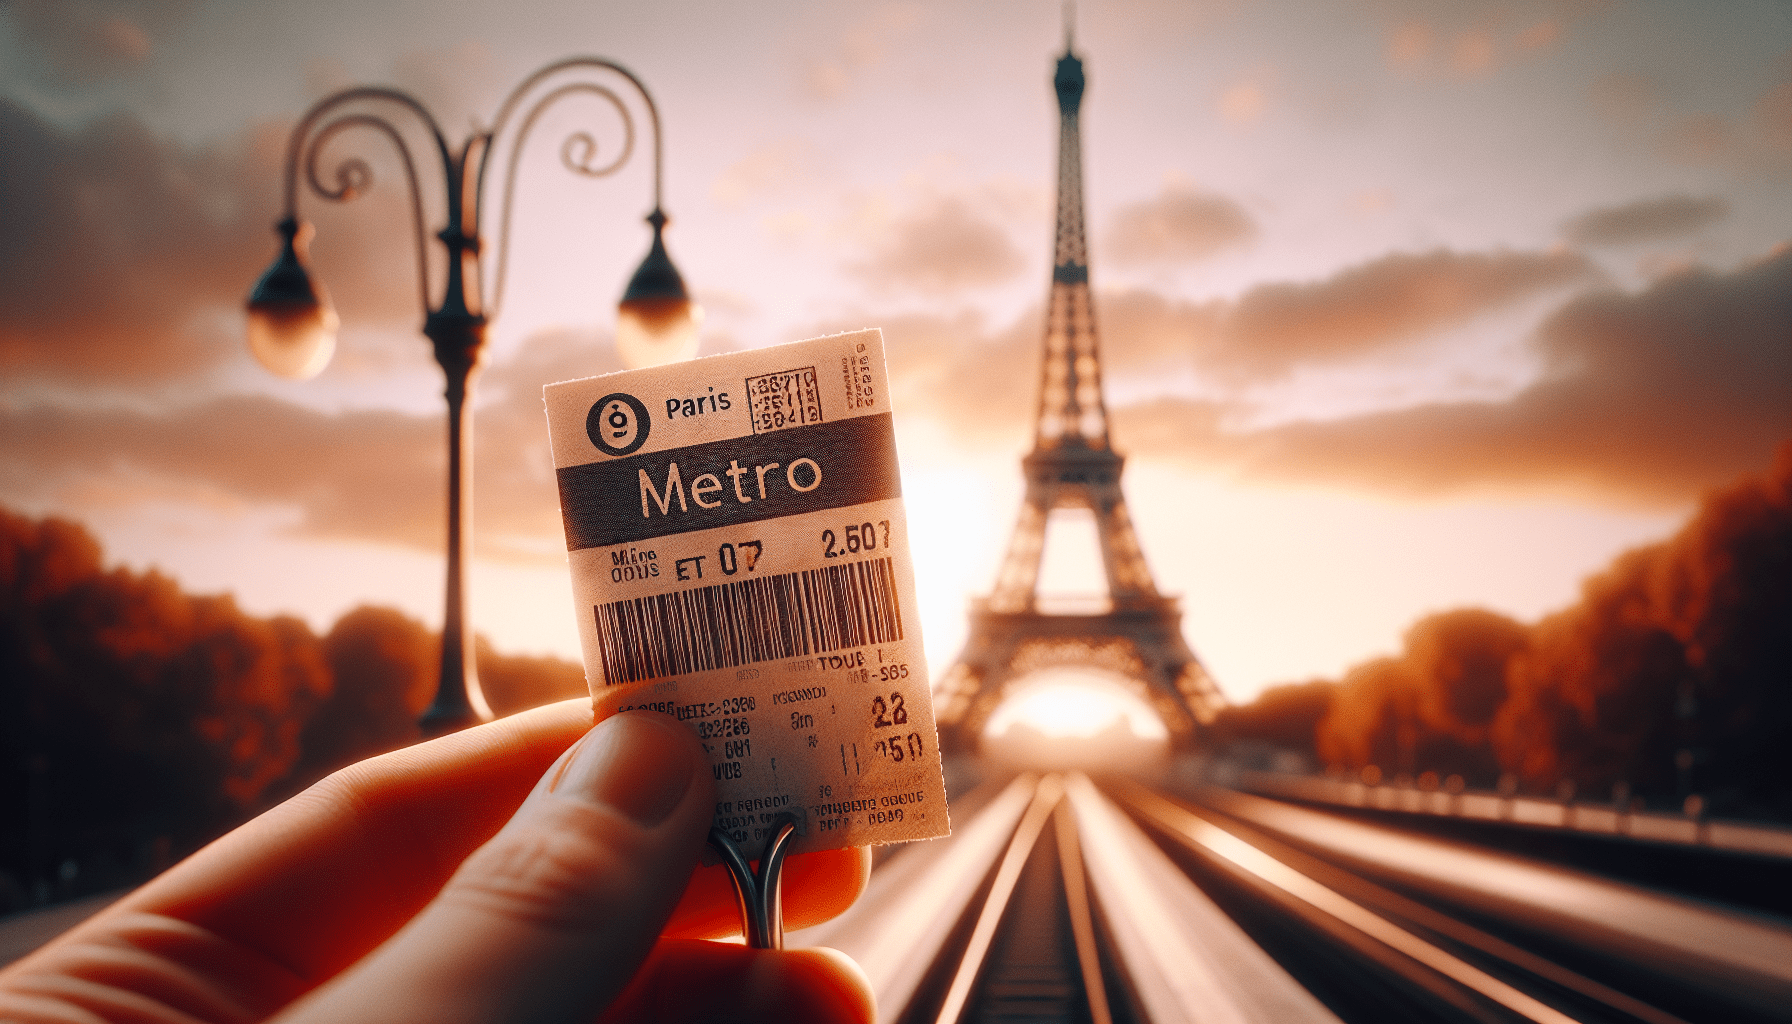 Is 500 Euros Enough For 3 Days In Paris?